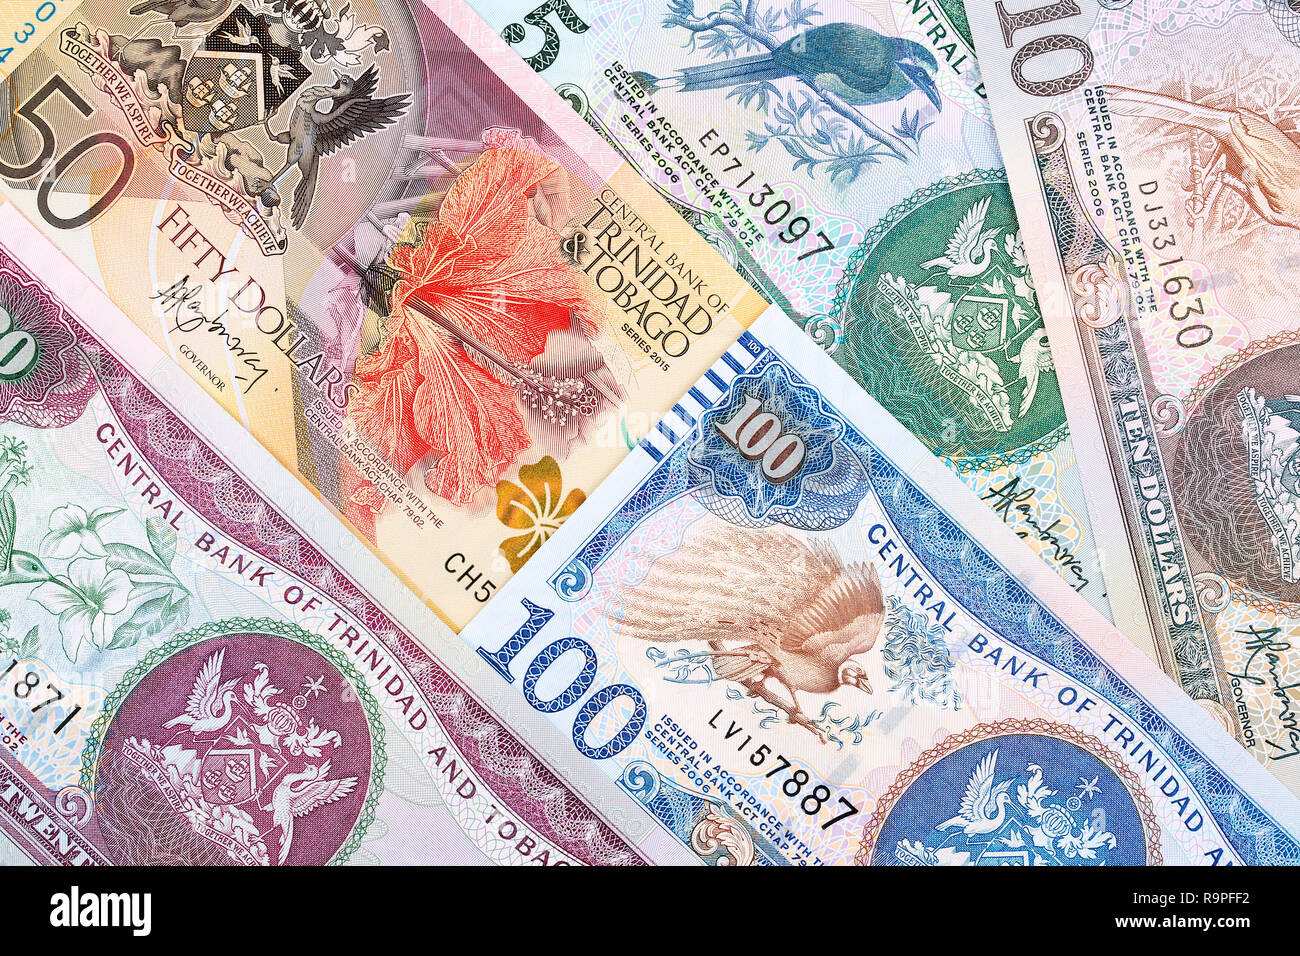 Trinidad Money High Resolution Stock Photography And Images Alamy